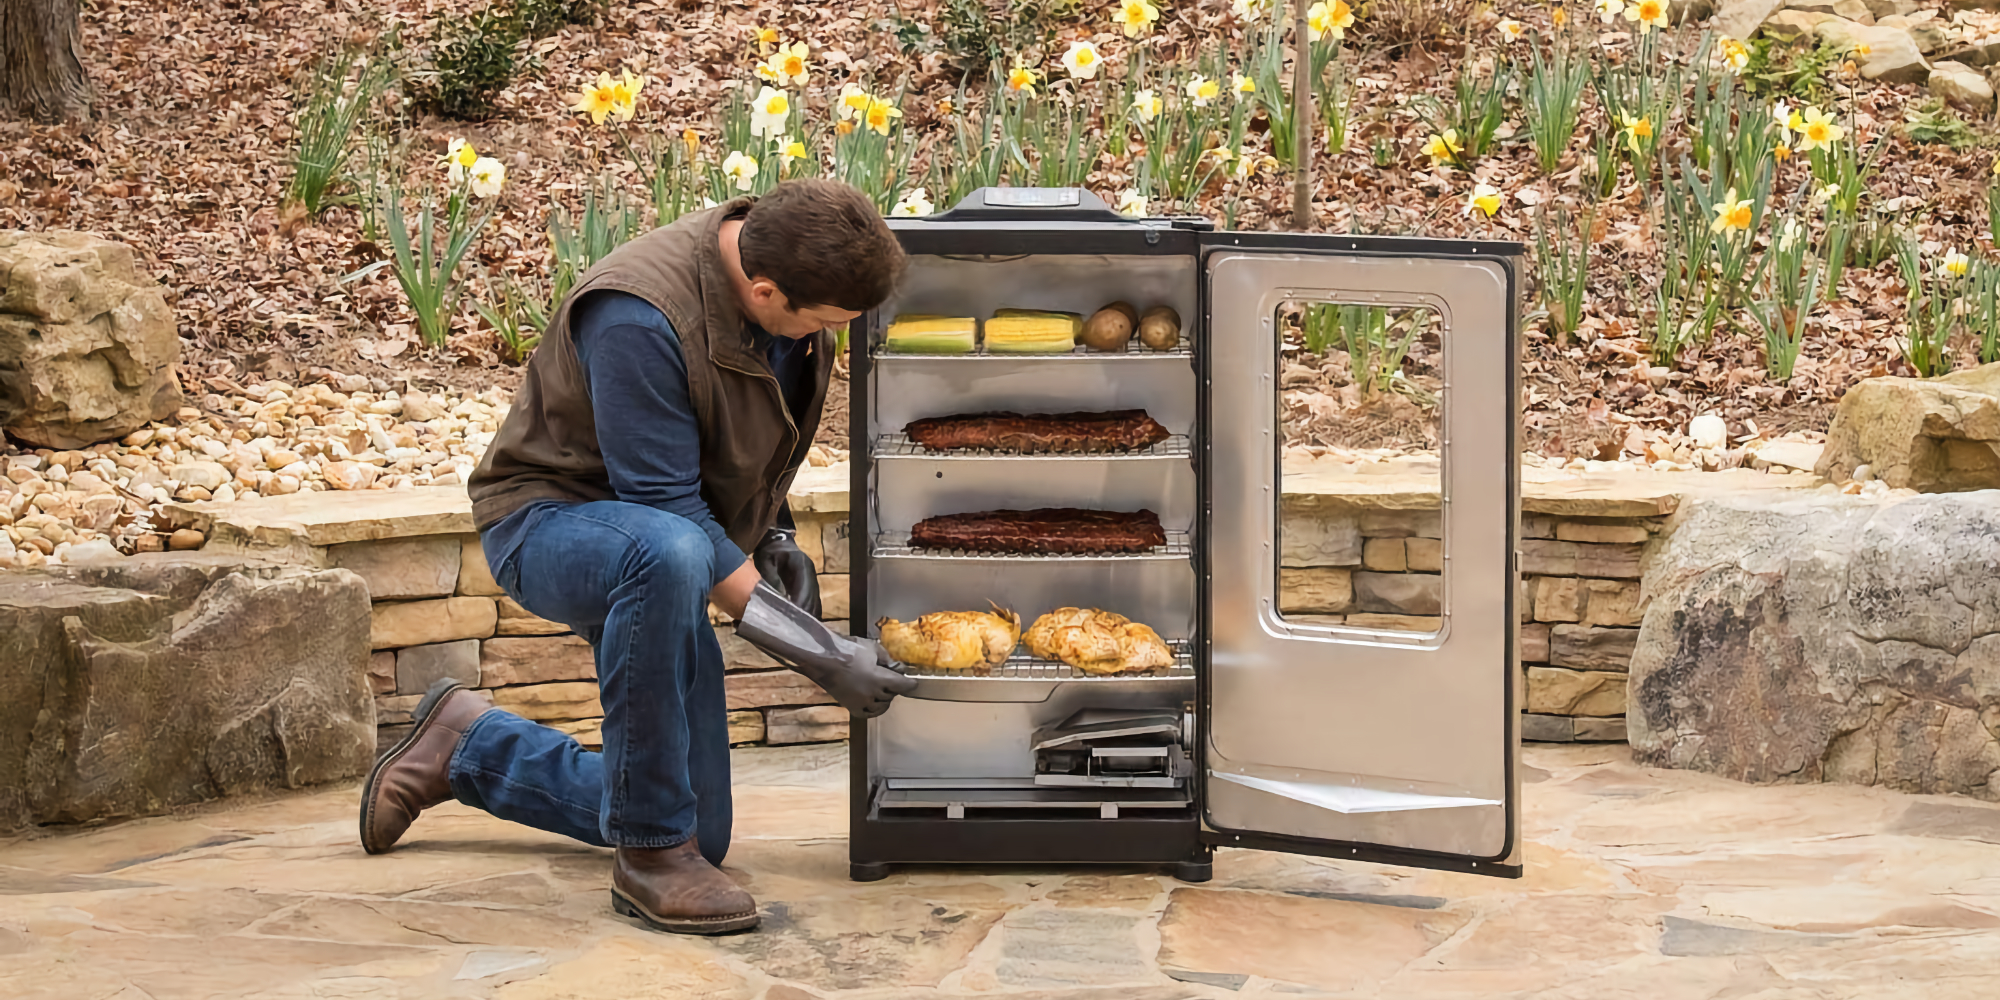 Masterbuilt's Bluetooth electric smoker brings the BBQ to your backyard at  2021 low of $270